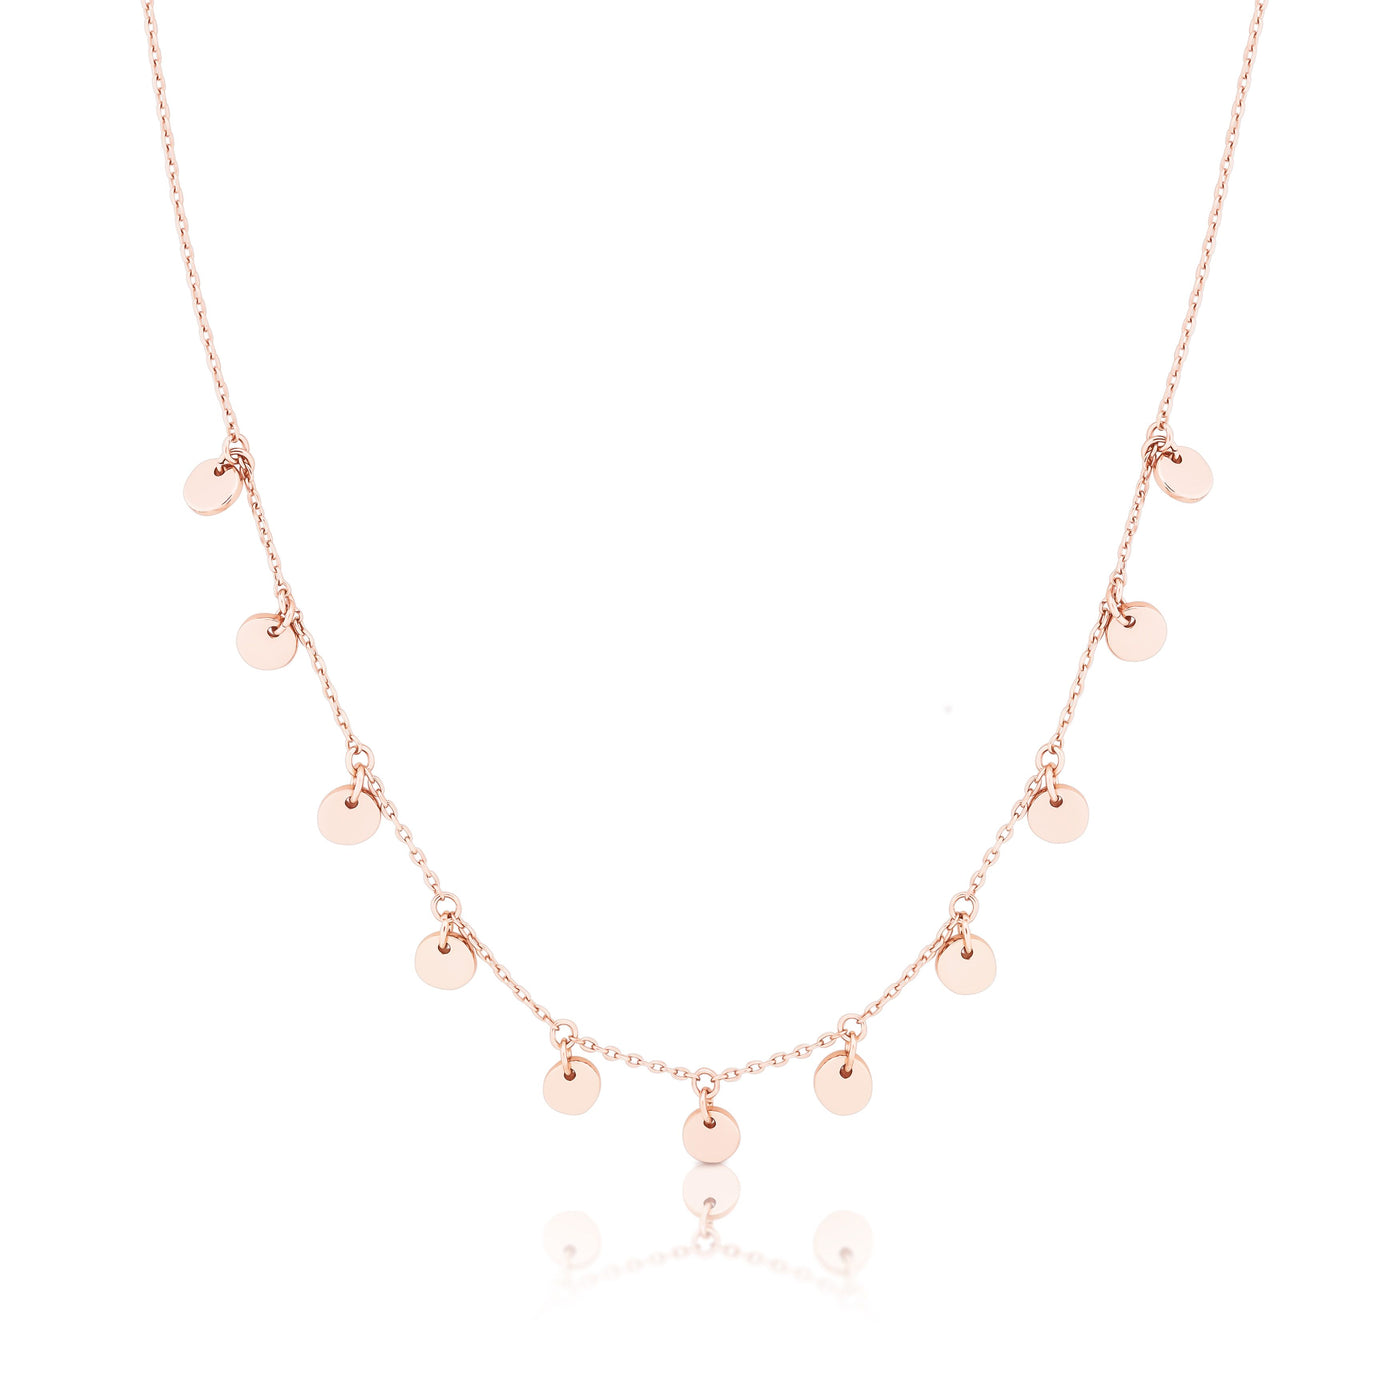 Romi Necklace - Mini Disc Chain - Rose Gold/Silver Plated